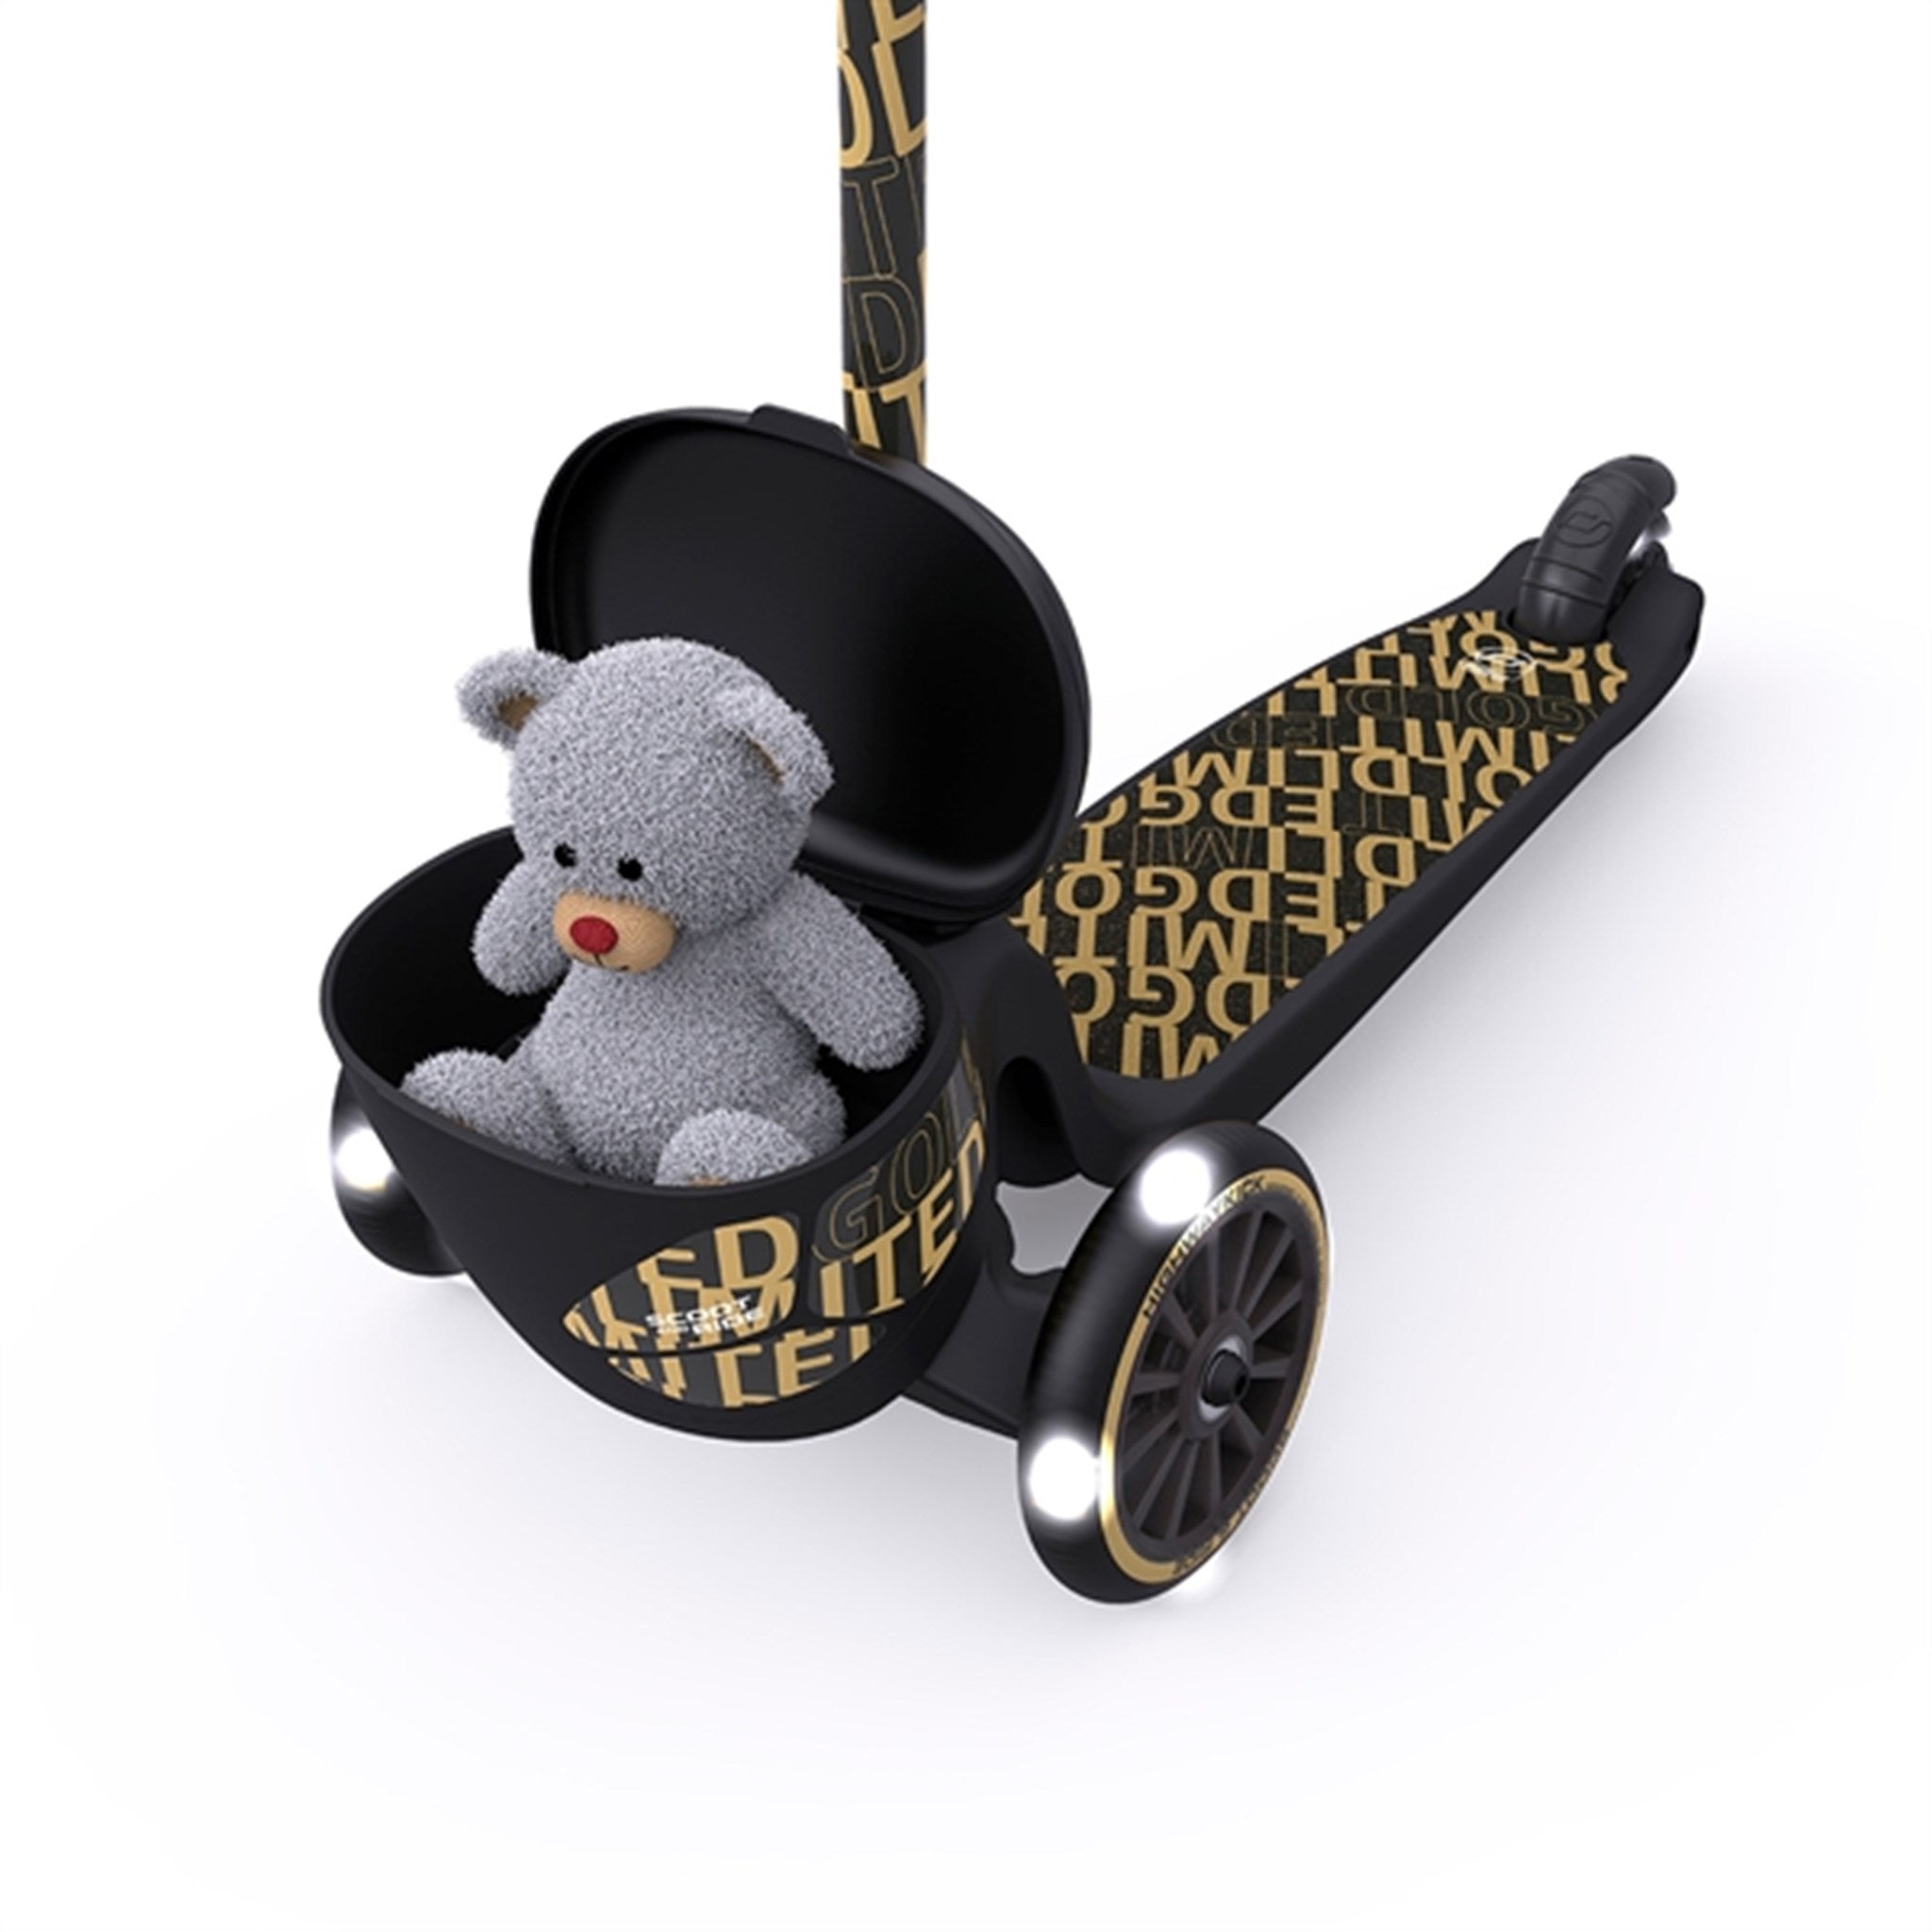 Scoot and Ride Highway Kick 2 Lifestyle Black/Gold 2